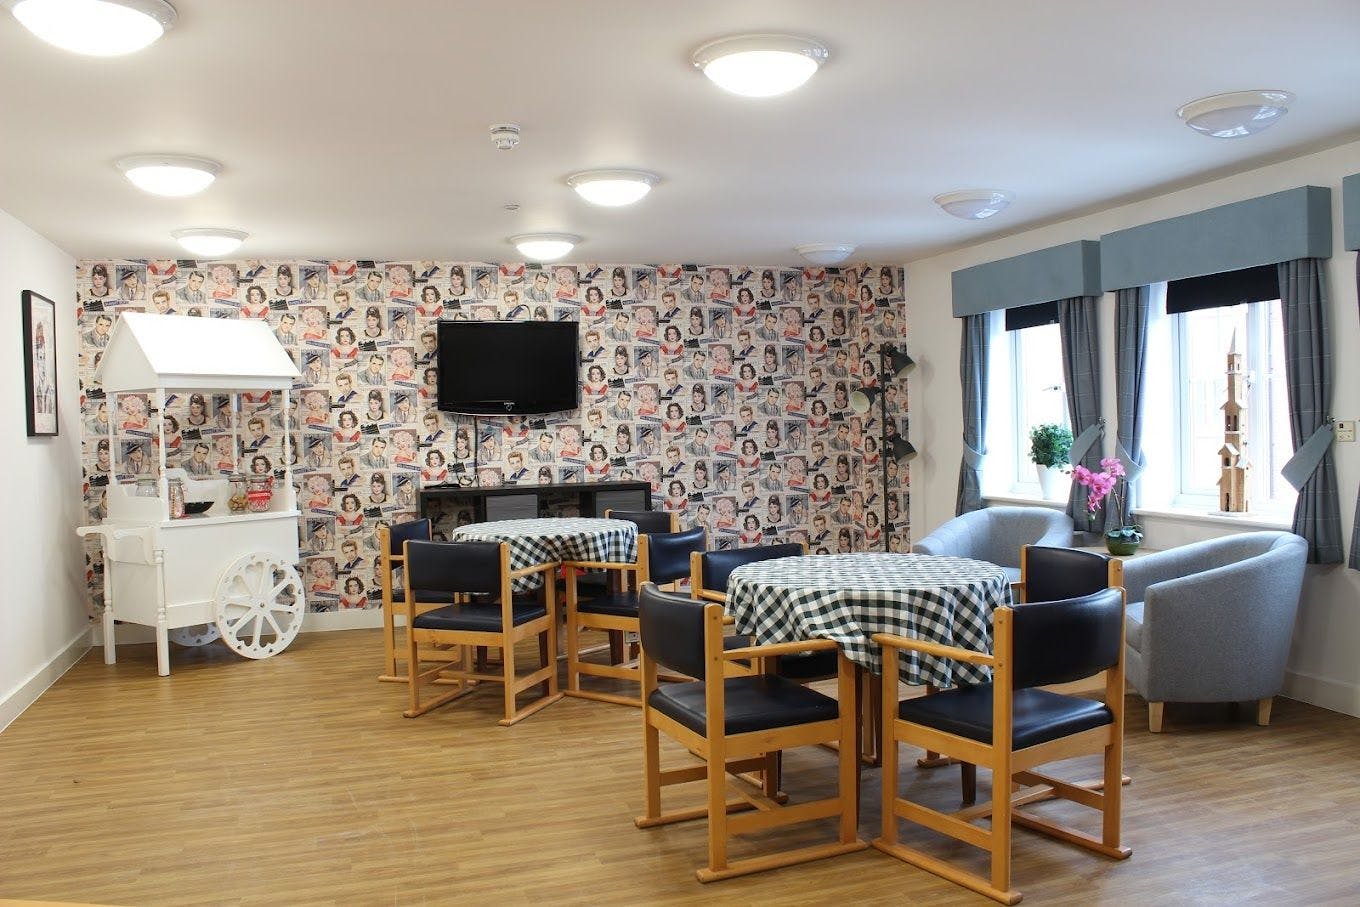 Maria Mallaband Care Group - Manorhey care home 6